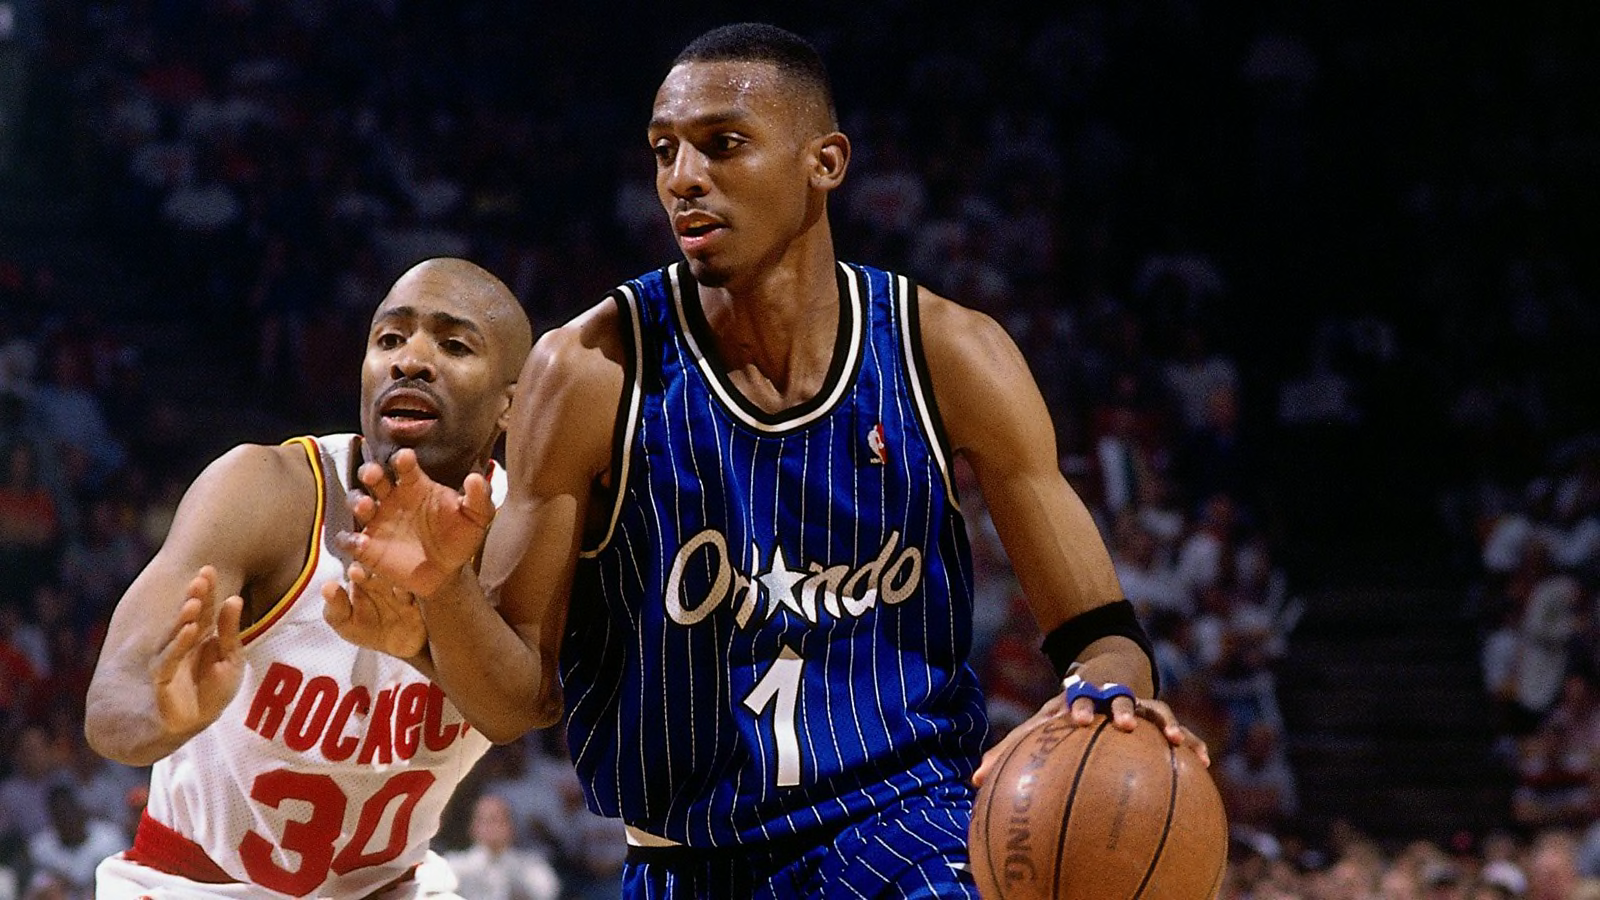 5 players who should be in the Basketball Hall of Fame